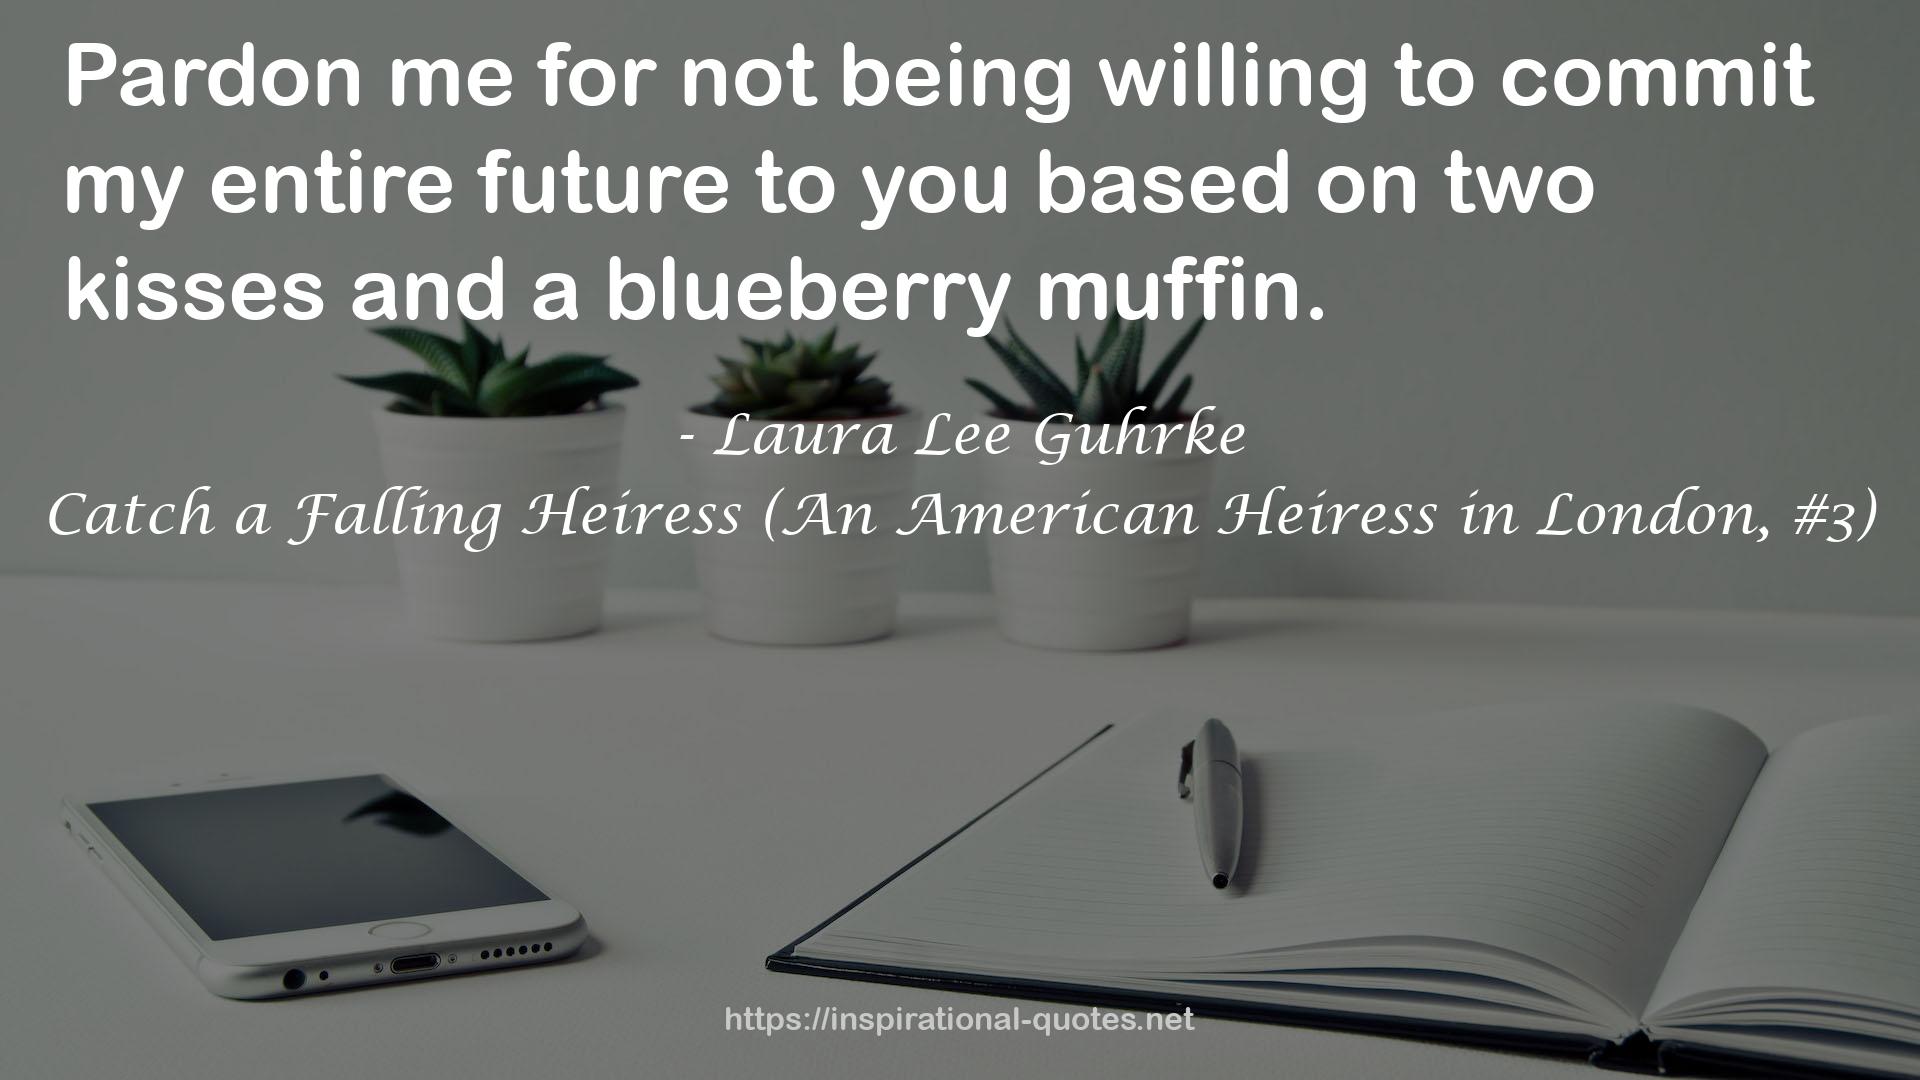 Catch a Falling Heiress (An American Heiress in London, #3) QUOTES